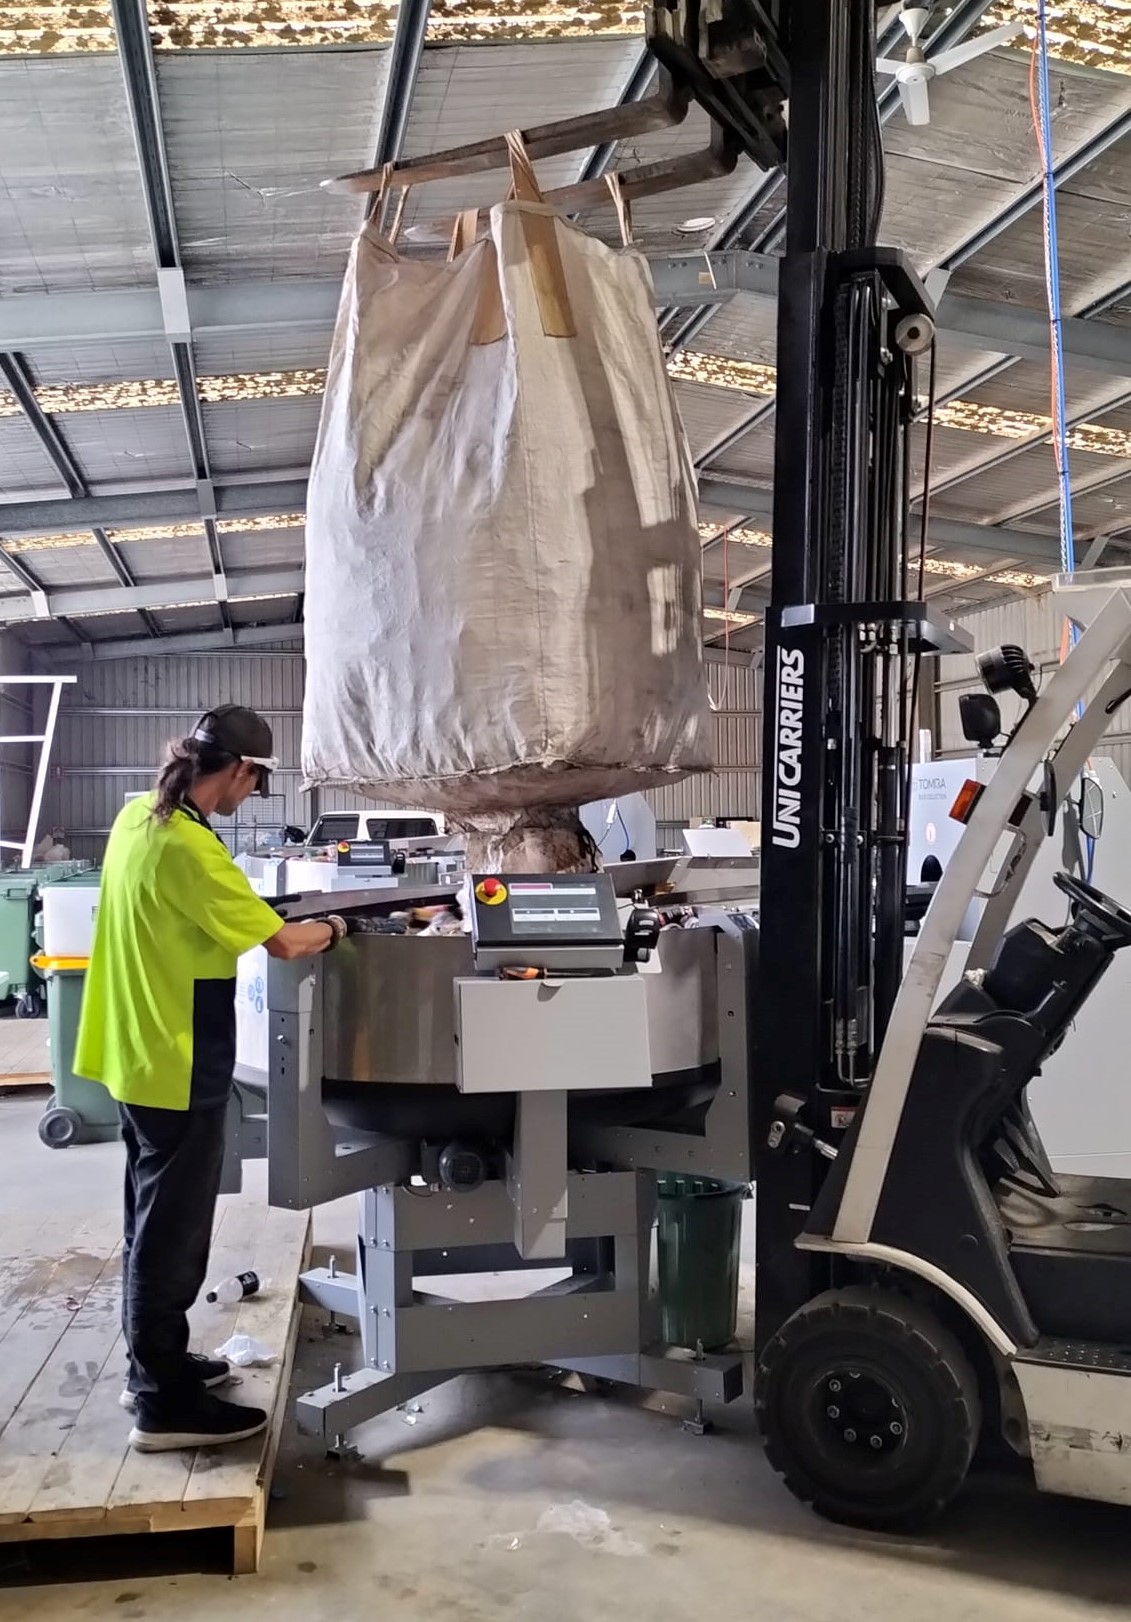 A man in high vis operates a forklift that is holding a big bag over the sorting machine.